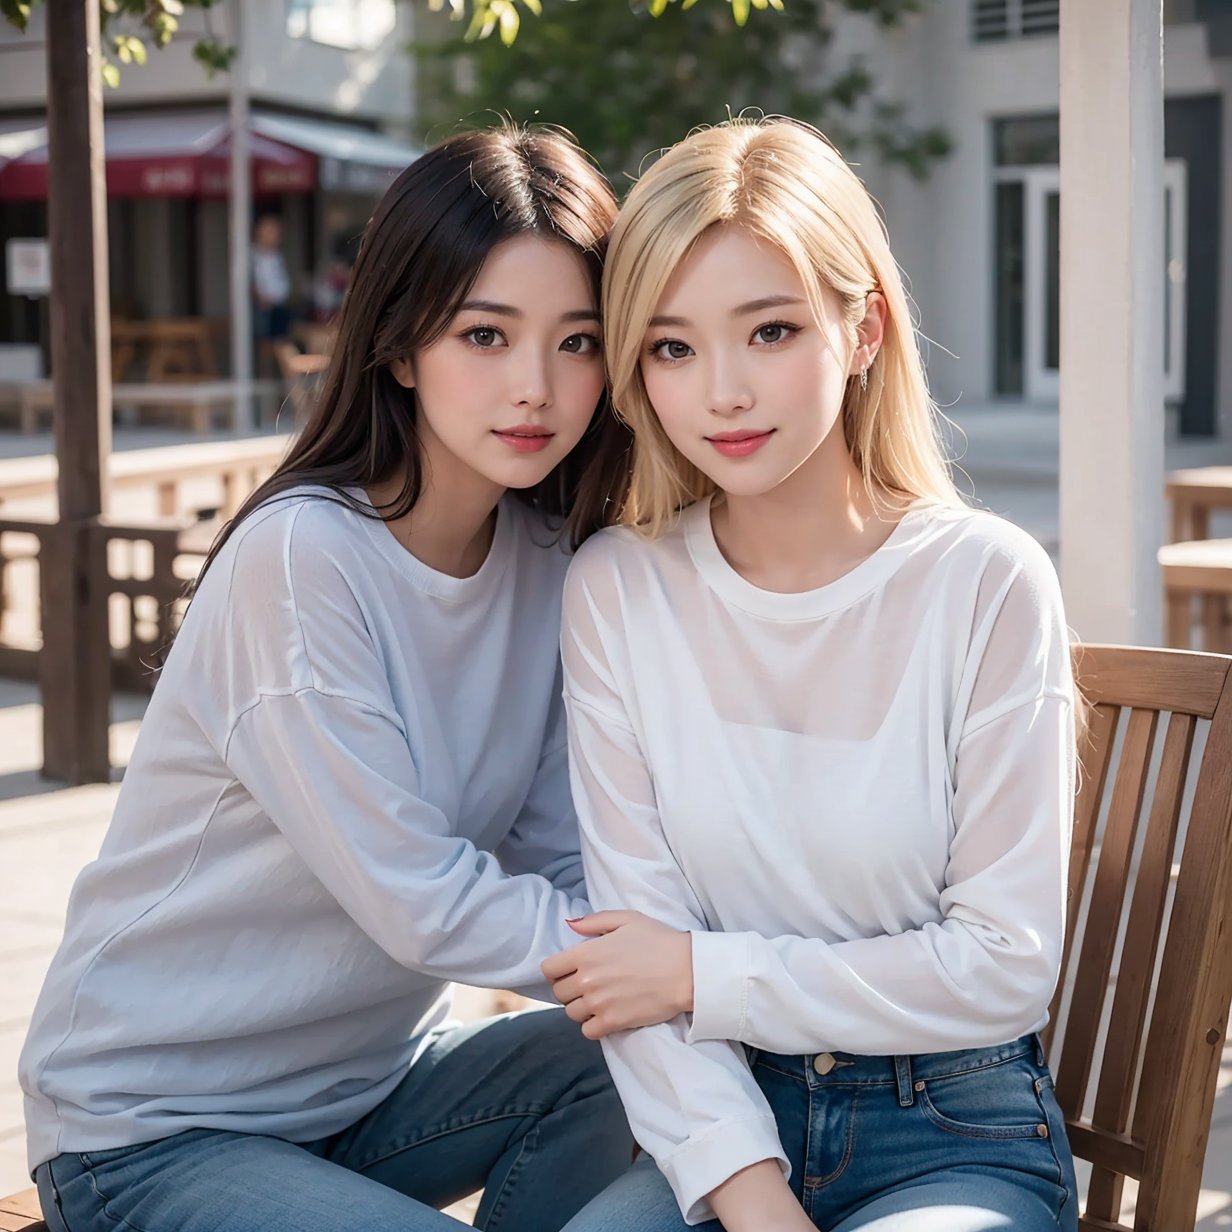 A stunning photorealistic masterpiece of an Asian woman and man in a romantic setting, surrounded by （beachside freshy sunlights )).The woman, with blonde hair and natural skin texture, wears long sleeve white OL shirt,and sexy jeans, posing dynamically with a smile, against a dimly lit shaded plaza background.((Night ambient, night  scene, cinematic photorealistic shooting,light and shadow.)),cloceup halfbody photography. sitting on chair, front view. looking at camera.
Her eyes are finely detailed with a hint of blush, as she looks directly leftside of the viewer. The scene is captured in breathtaking 8K detail, with film grain and a shallow depth of field, showcasing the beauty of their natural skin texture and the intricate flower arrangement.
